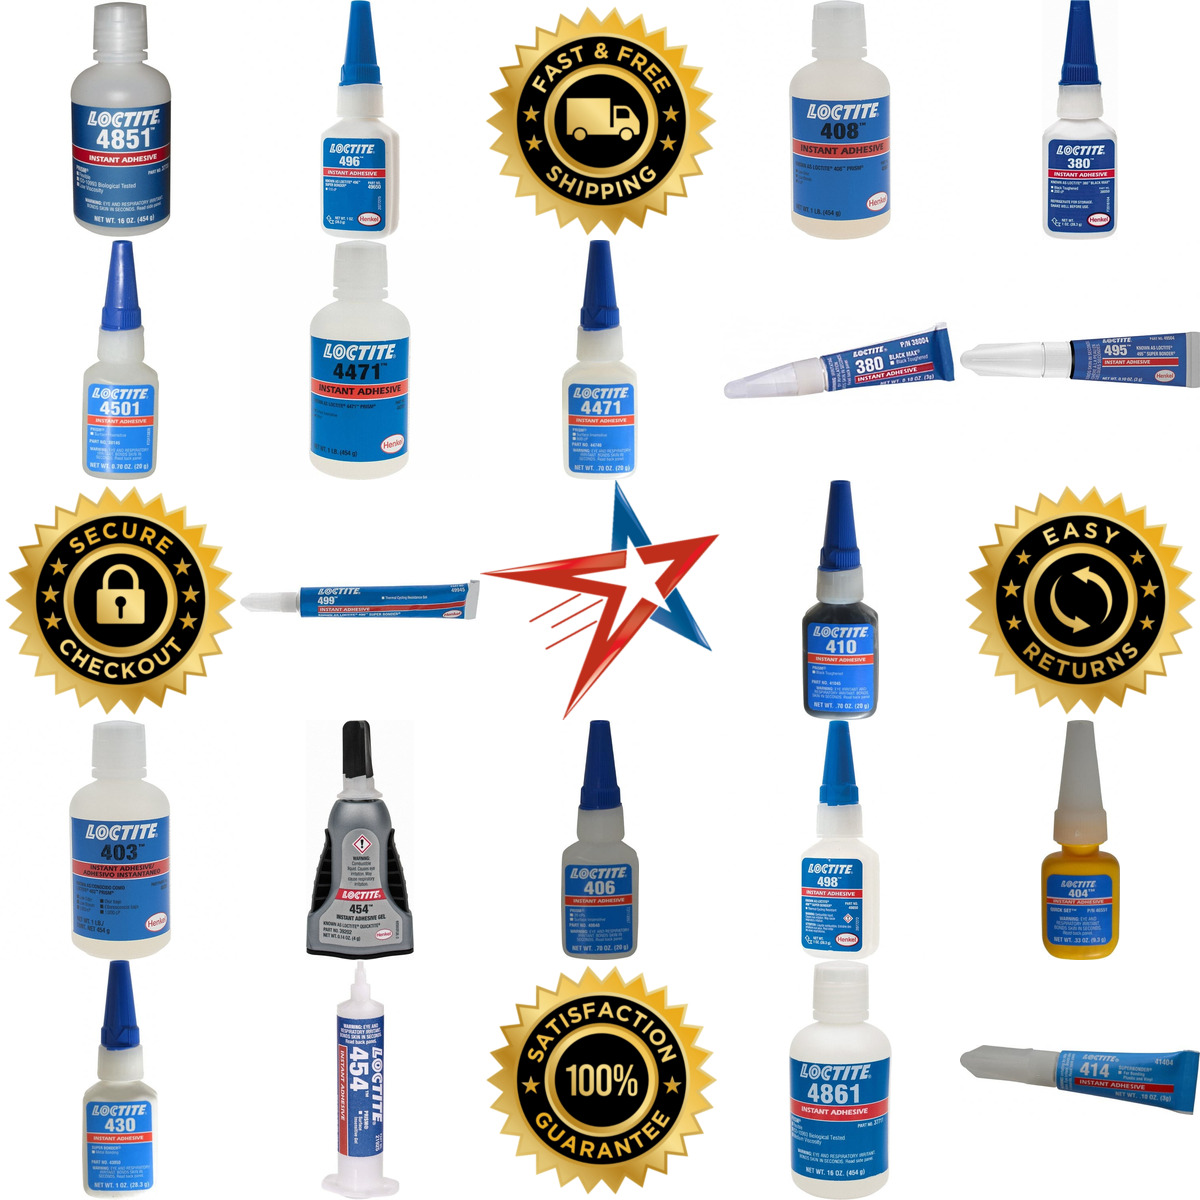 A selection of Loctite products on GoVets